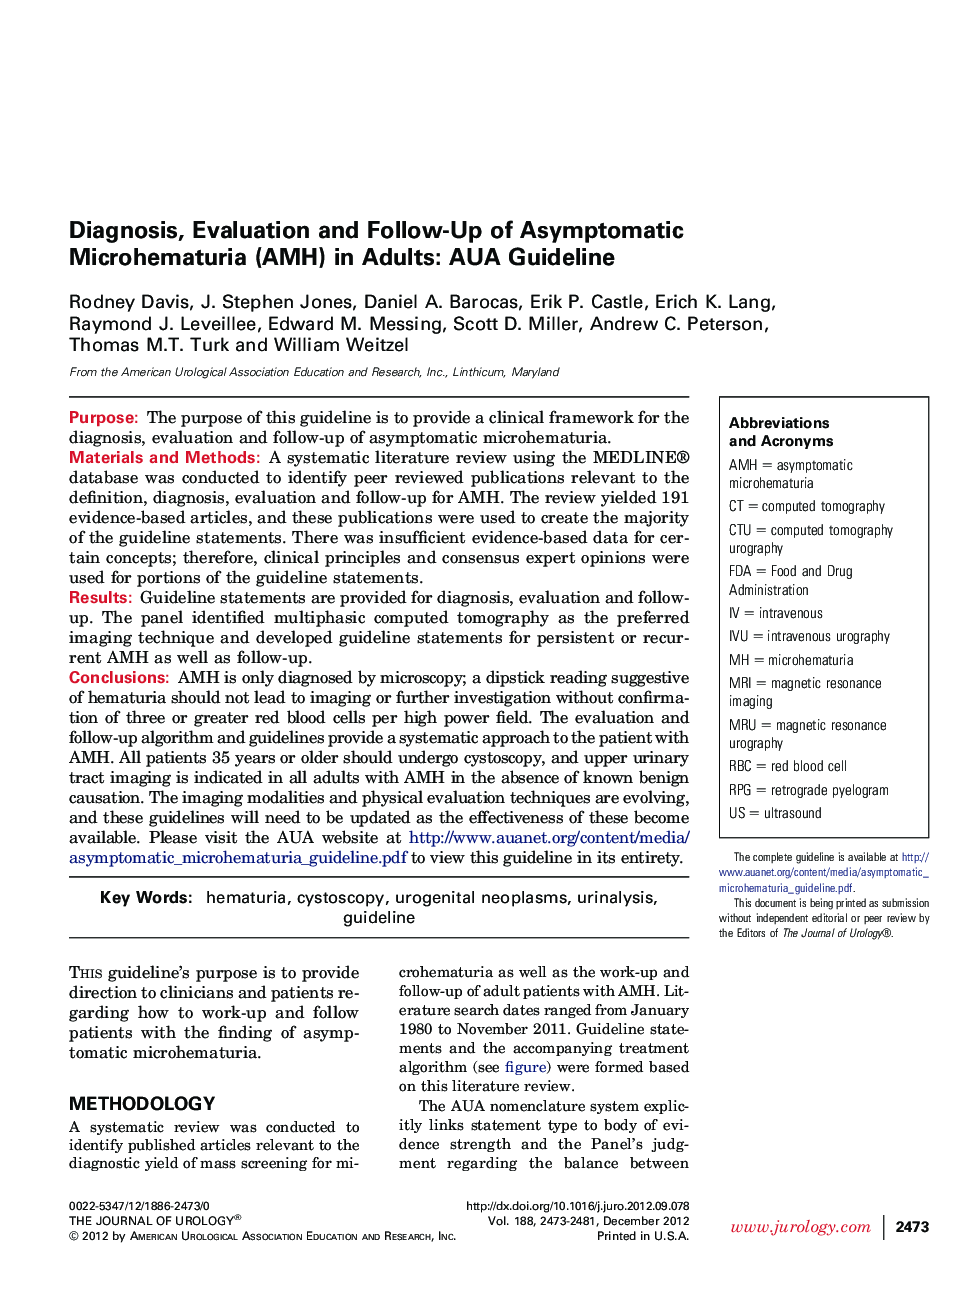 Diagnosis, Evaluation and Follow-Up of Asymptomatic Microhematuria (AMH) in Adults: AUA Guideline 